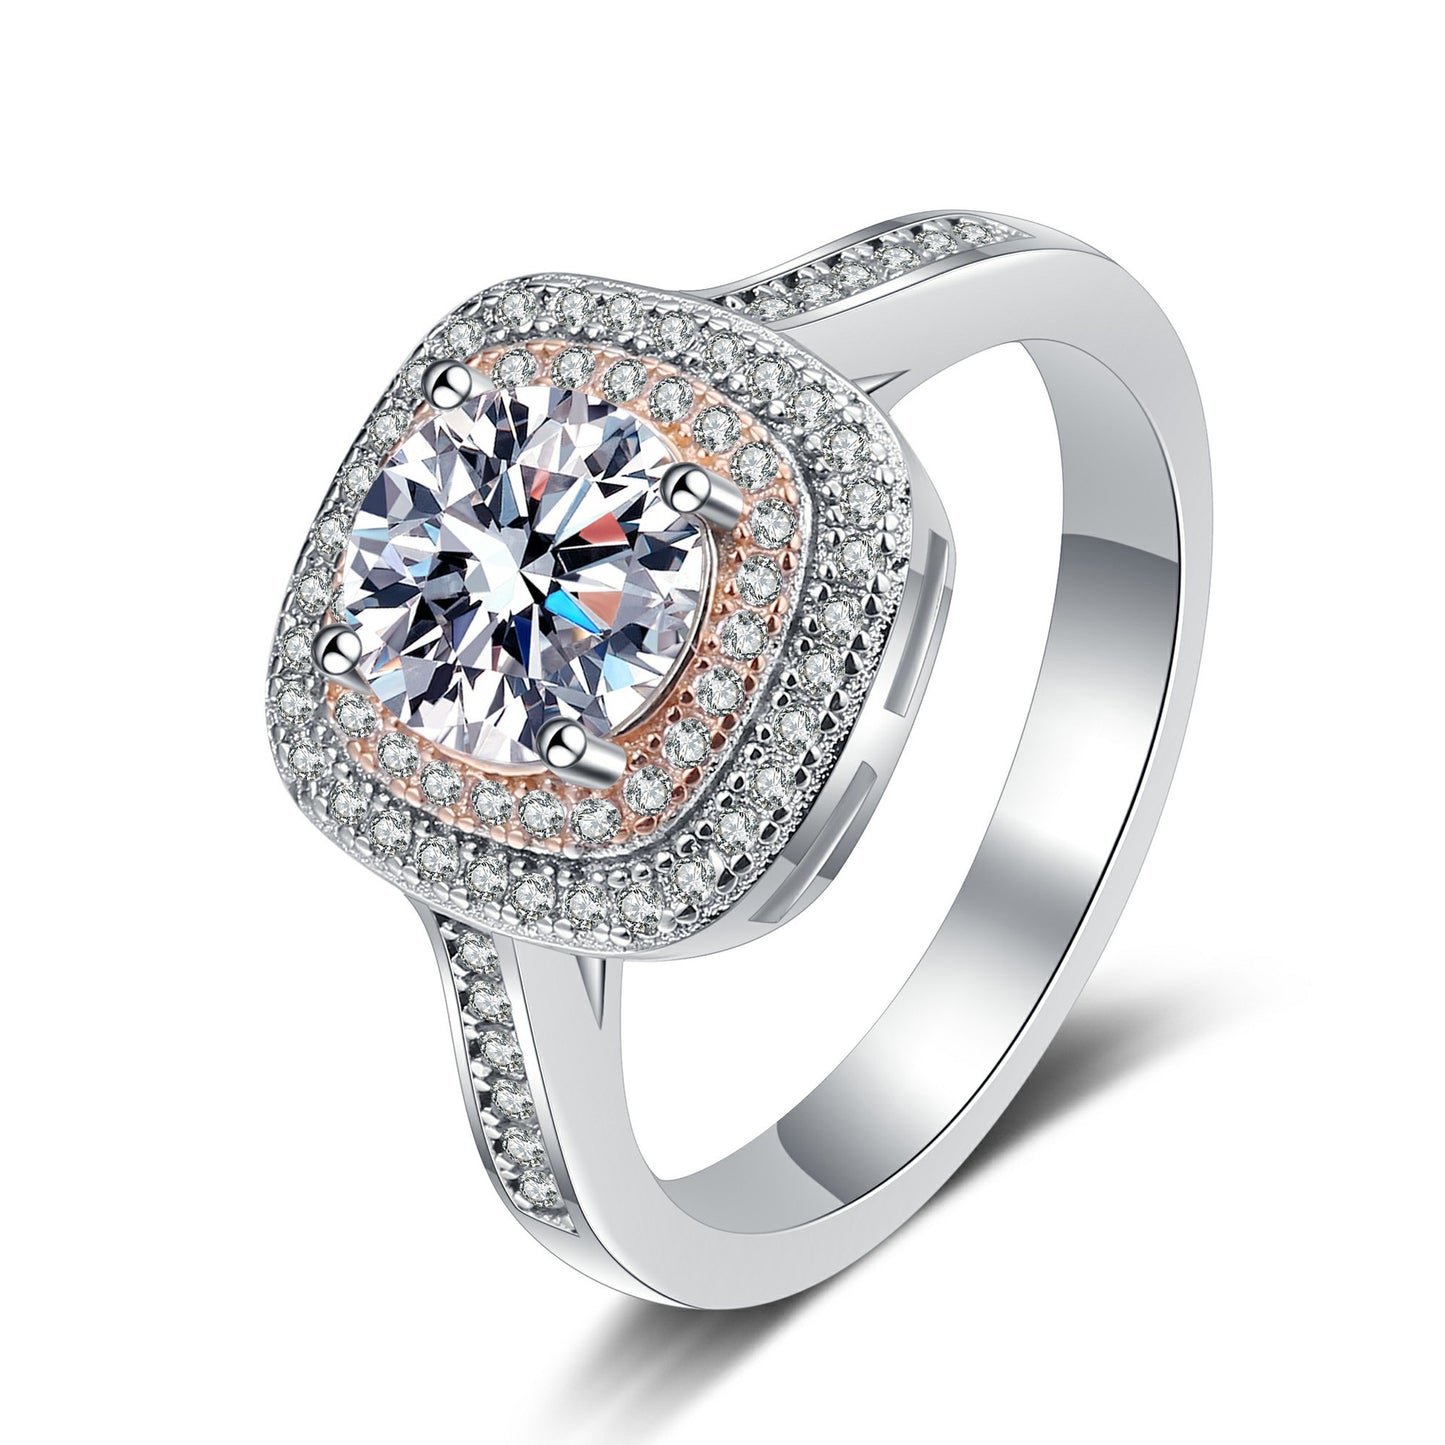 1 Carat Double Halo Moissanite Ring Gift for Her